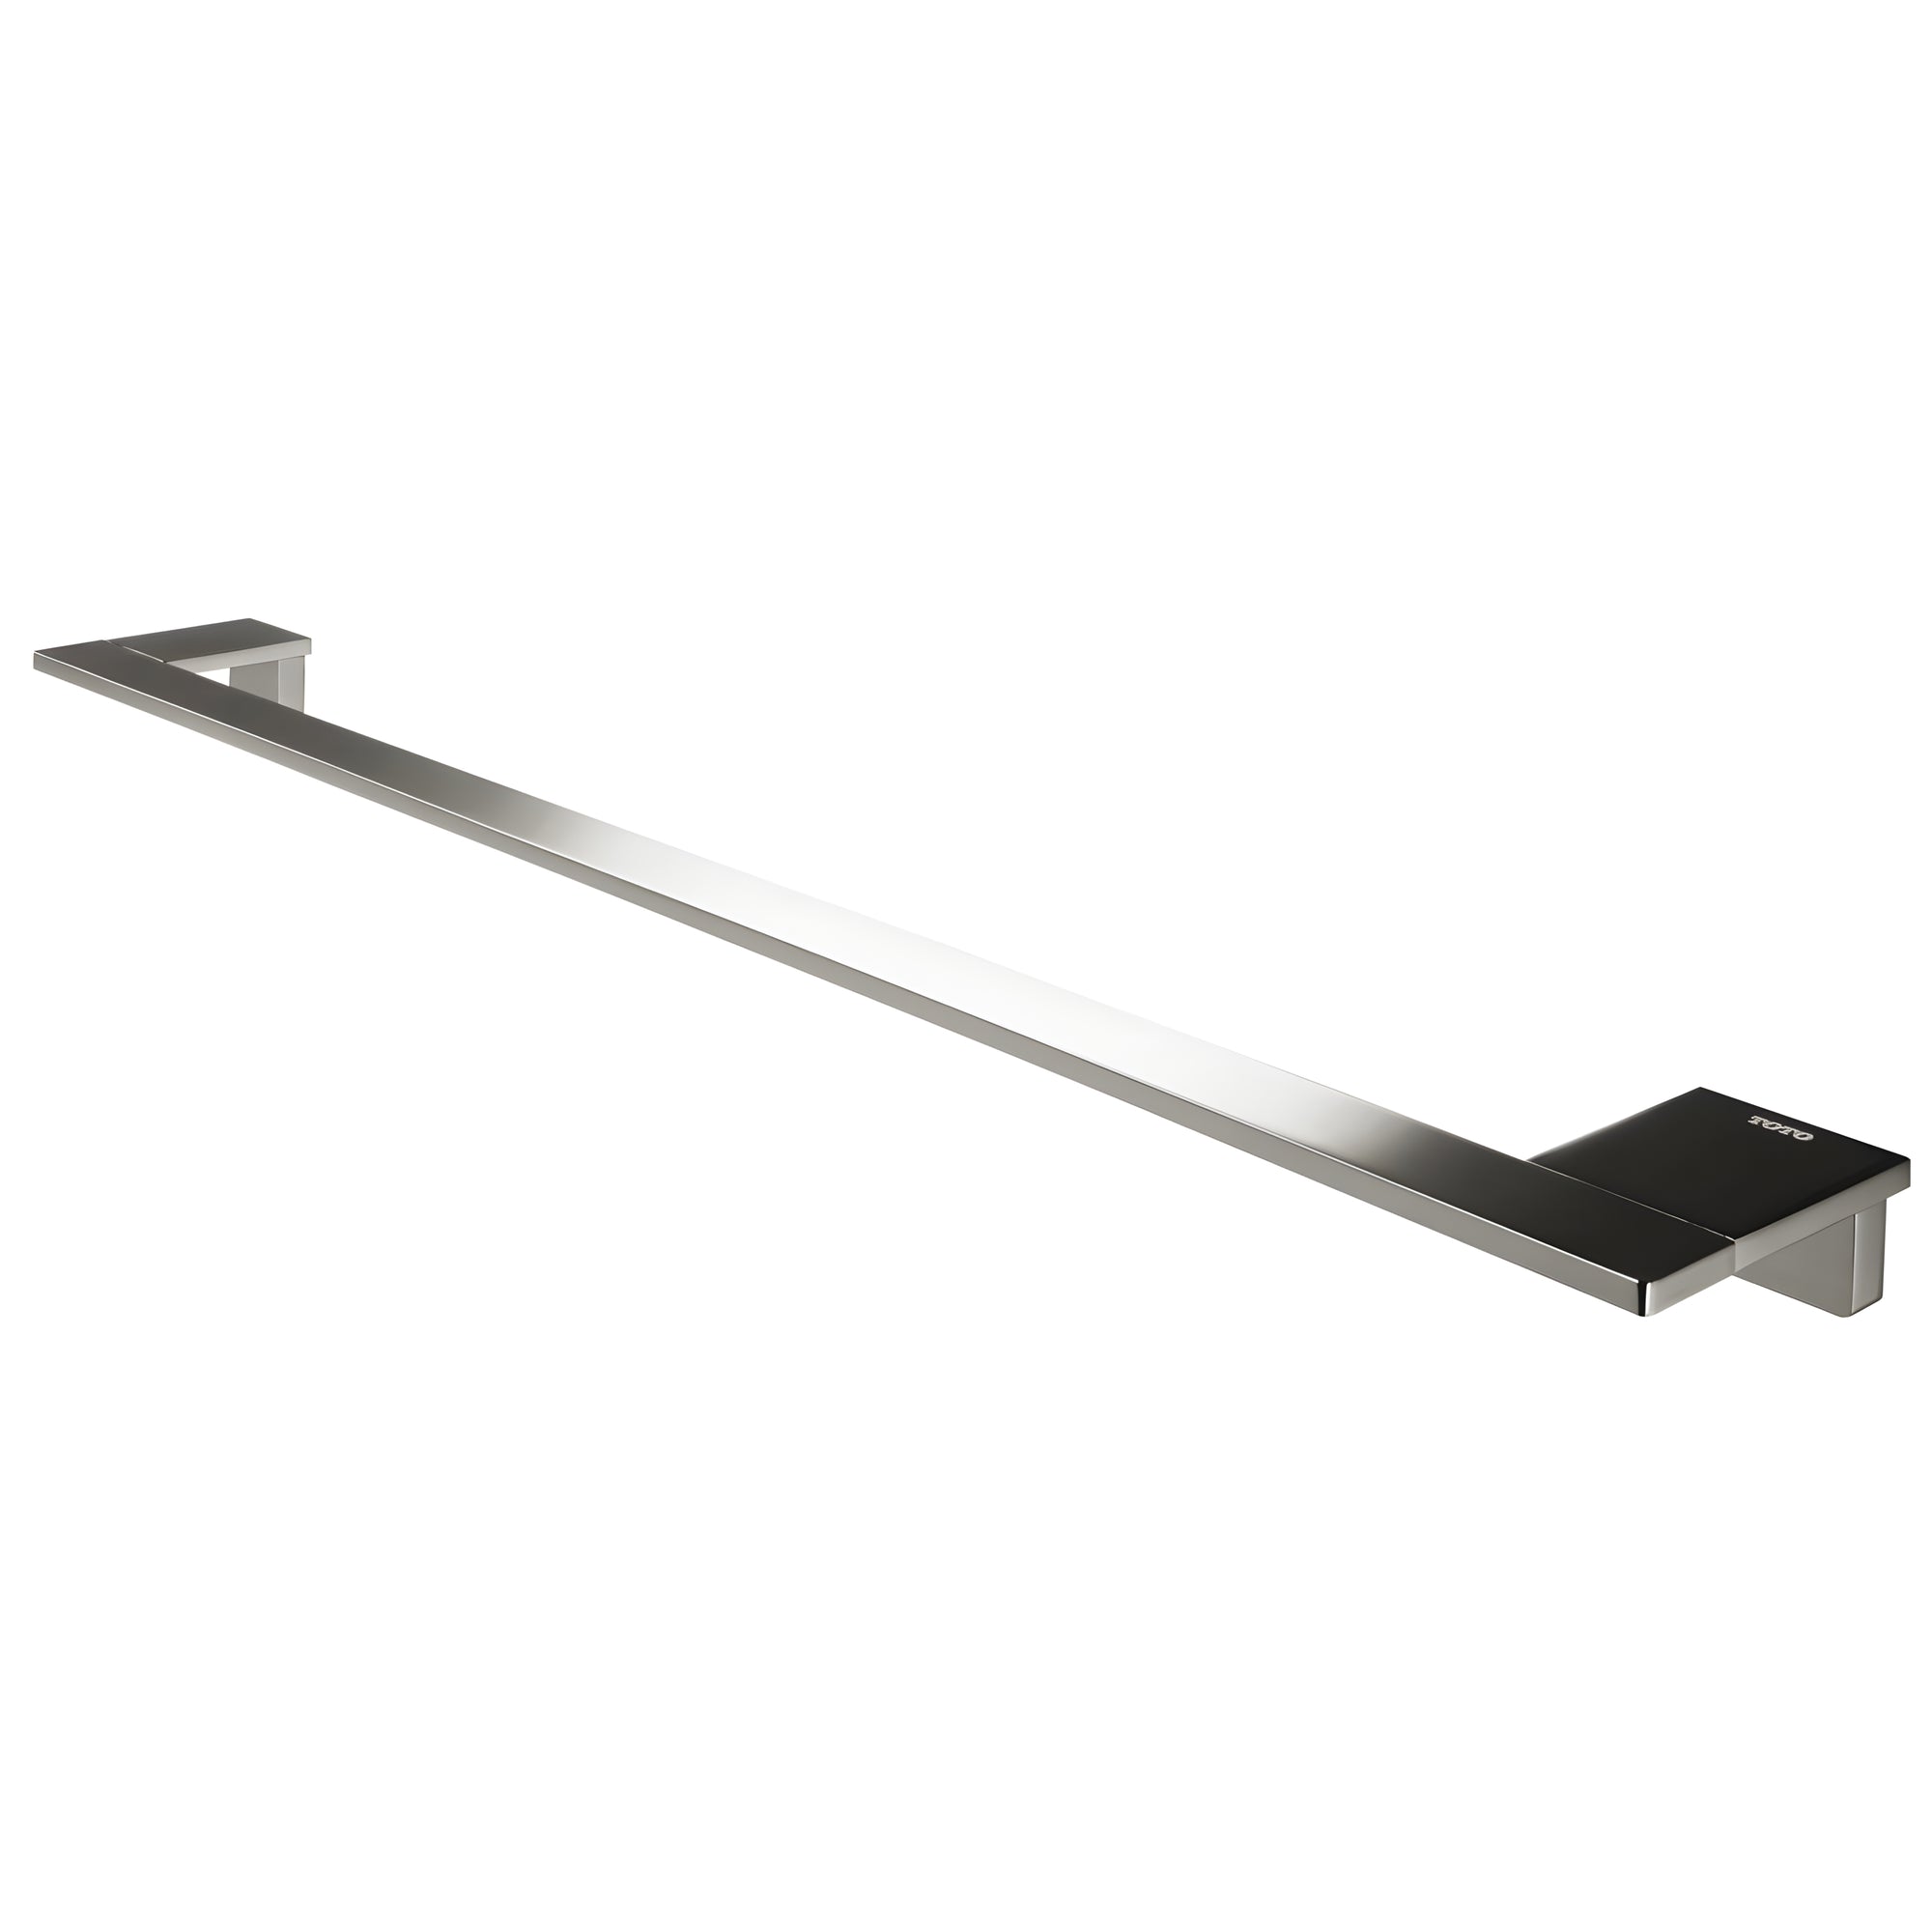 TOTO NEOREST LE NON-HEATED TOWEL BAR